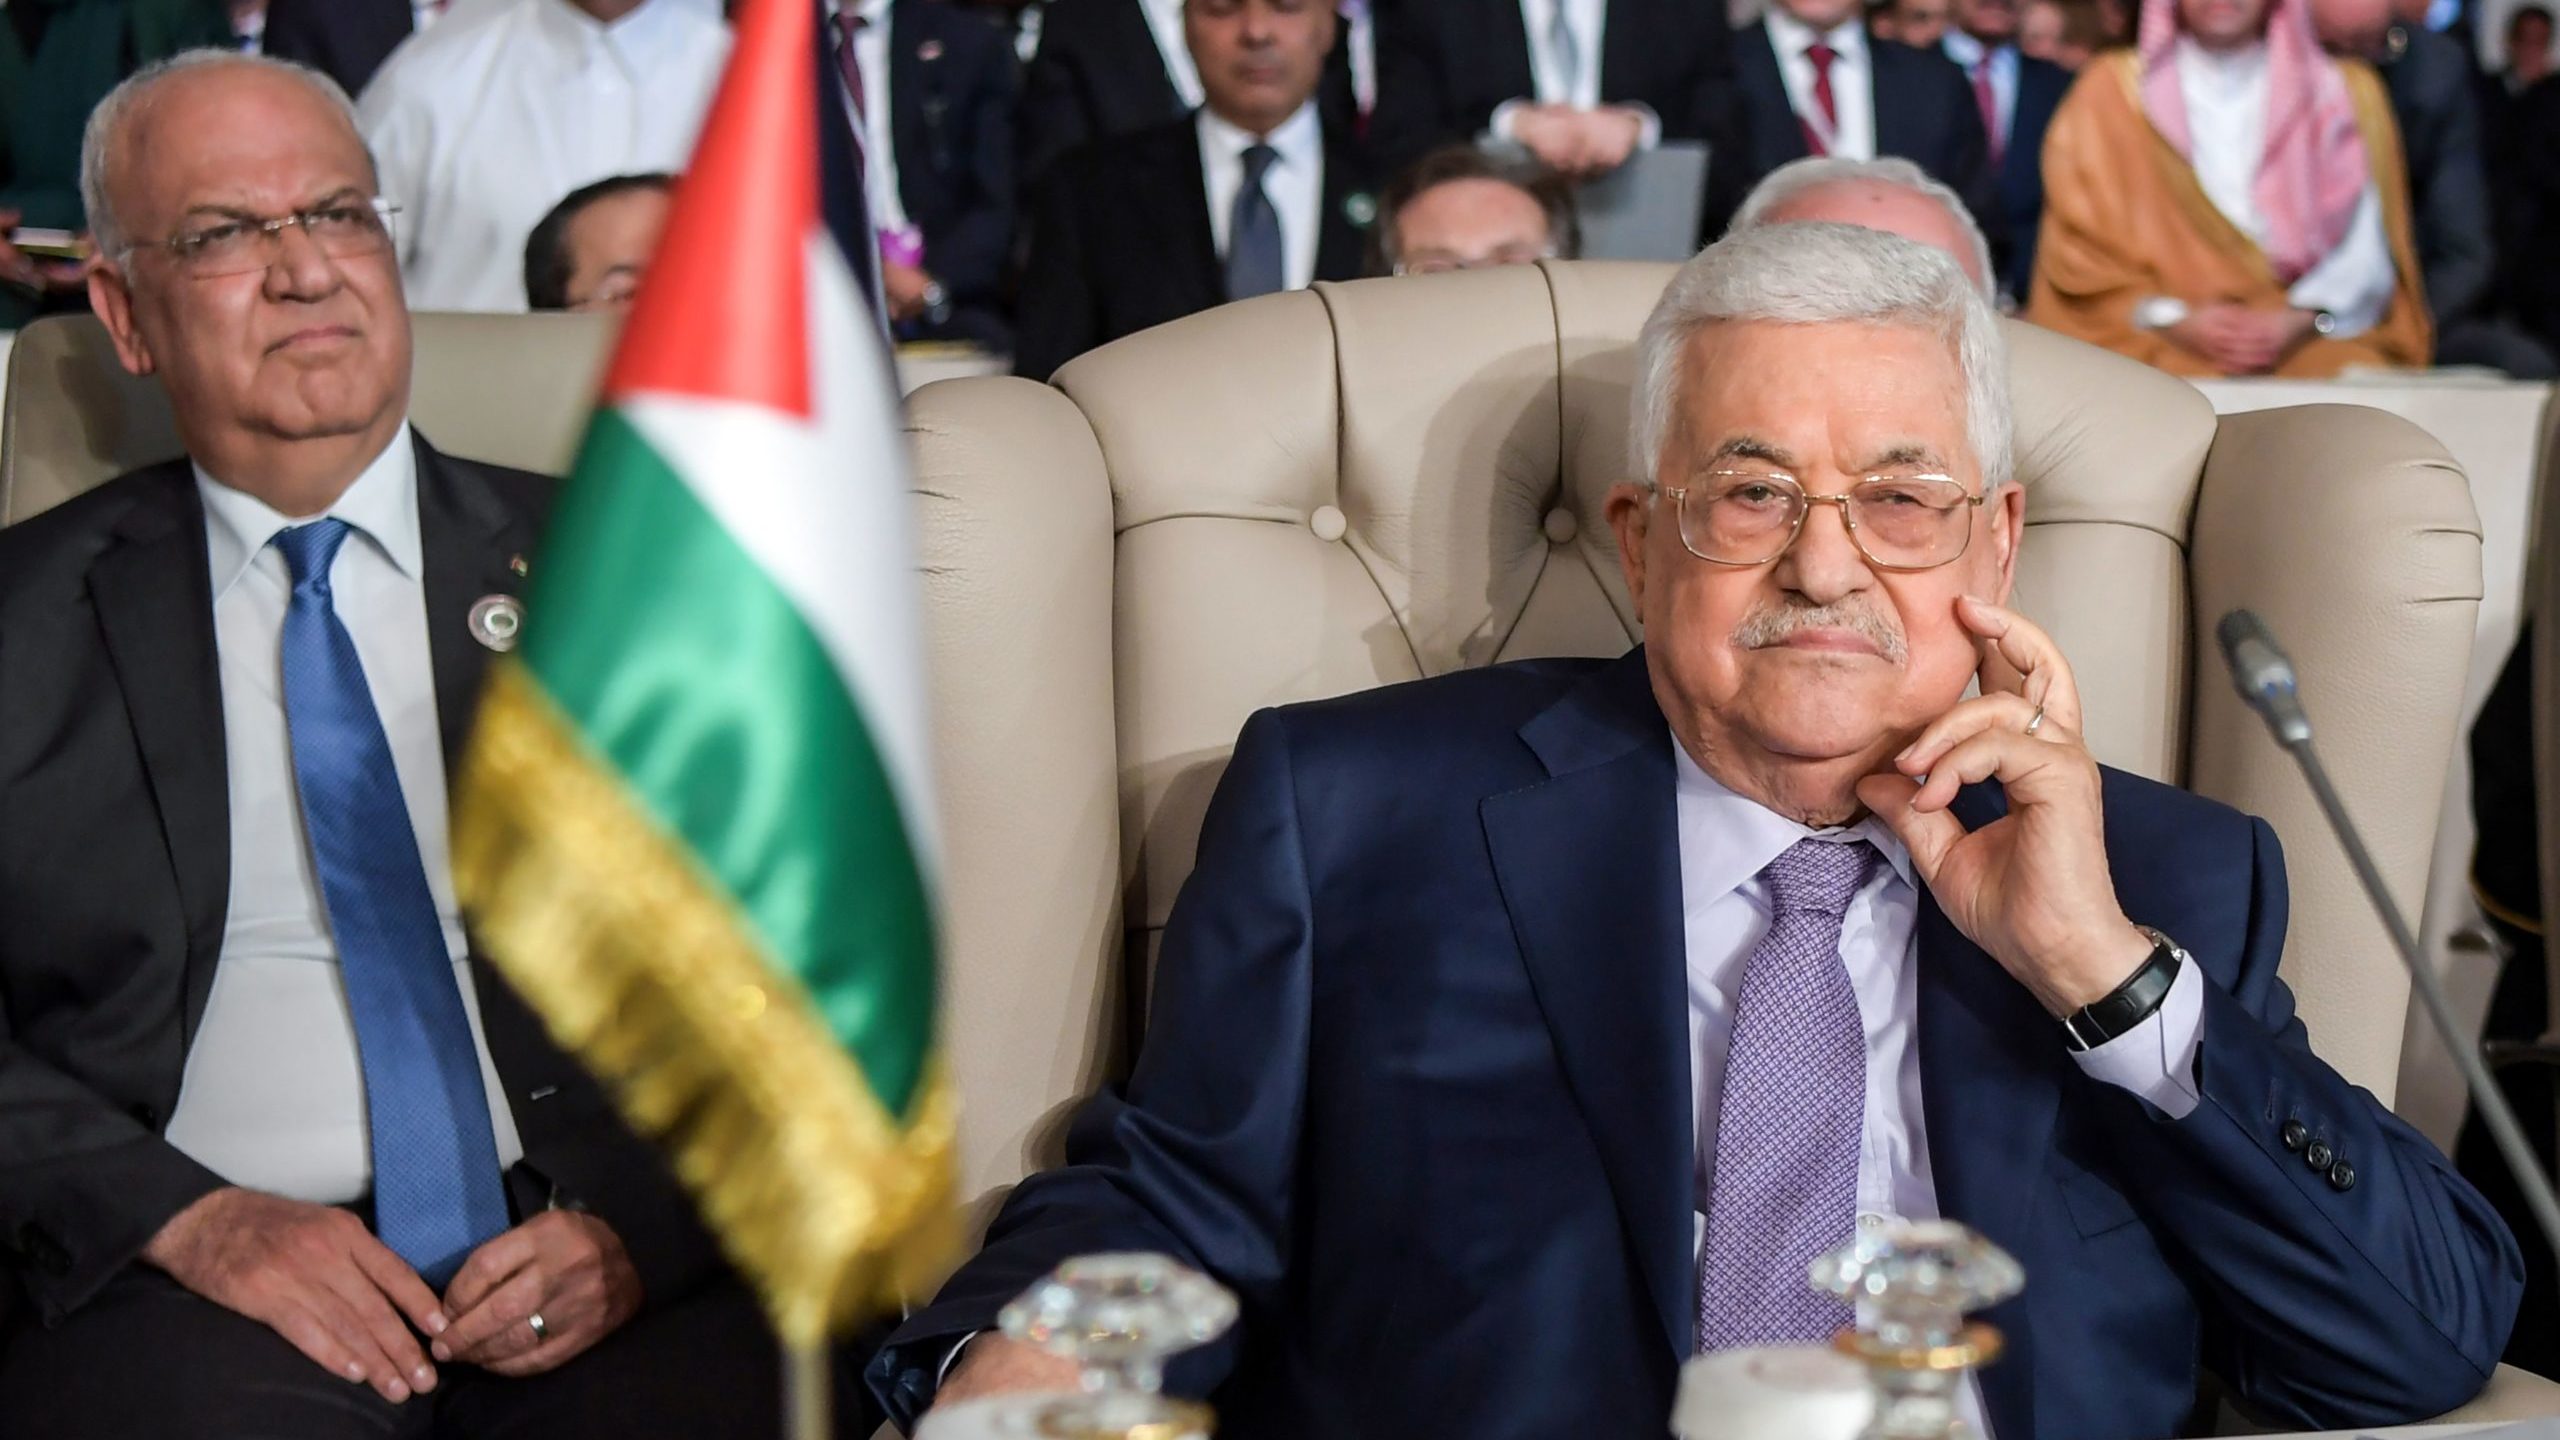 PLO Meeting Sunday To Fill Key Posts, Minister al-Sheikh Expected To Win Big Prize